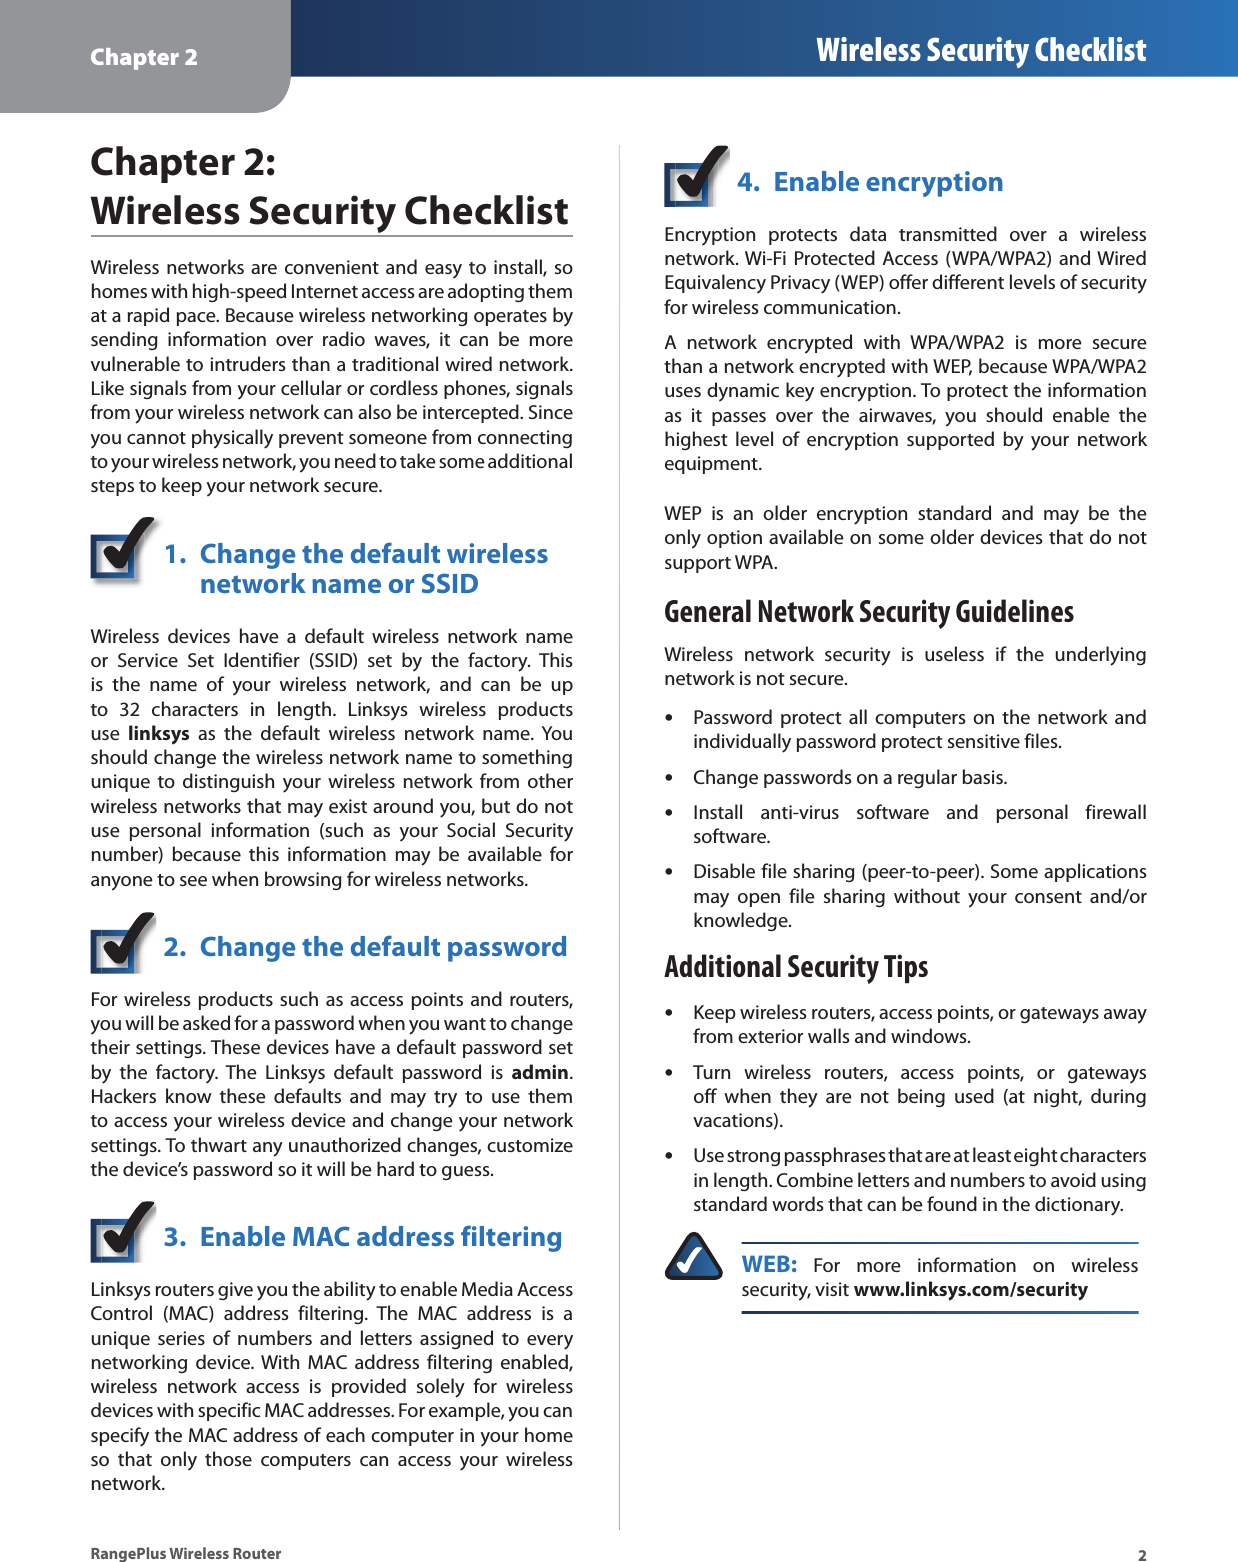 Chapter 2 Wireless Security Checklist2RangePlus Wireless RouterChapter 2: Wireless Security ChecklistWireless networks are convenient and easy to install, so homes with high-speed Internet access are adopting them at a rapid pace. Because wireless networking operates by sending information over radio waves, it can be more vulnerable to intruders than a traditional wired network. Like signals from your cellular or cordless phones, signals from your wireless network can also be intercepted. Since you cannot physically prevent someone from connecting to your wireless network, you need to take some additional steps to keep your network secure. 1. Change the default wireless network name or SSIDWireless devices have a default wireless network name or Service Set Identifier (SSID) set by the factory. This is the name of your wireless network, and can be up to 32 characters in length. Linksys wireless products use linksys as the default wireless network name. You should change the wireless network name to something unique to distinguish your wireless network from other wireless networks that may exist around you, but do not use personal information (such as your Social Security number) because this information may be available for anyone to see when browsing for wireless networks. 2. Change the default passwordFor wireless products such as access points and routers, you will be asked for a password when you want to change their settings. These devices have a default password set by the factory. The Linksys default password is admin.Hackers know these defaults and may try to use them to access your wireless device and change your network settings. To thwart any unauthorized changes, customize the device’s password so it will be hard to guess.3. Enable MAC address filteringLinksys routers give you the ability to enable Media Access Control (MAC) address filtering. The MAC address is a unique series of numbers and letters assigned to every networking device. With MAC address filtering enabled, wireless network access is provided solely for wireless devices with specific MAC addresses. For example, you can specify the MAC address of each computer in your home so that only those computers can access your wireless network. 4. Enable encryptionEncryption protects data transmitted over a wireless network. Wi-Fi Protected Access (WPA/WPA2) and Wired Equivalency Privacy (WEP) offer different levels of security for wireless communication.A network encrypted with WPA/WPA2 is more secure than a network encrypted with WEP, because WPA/WPA2 uses dynamic key encryption. To protect the information as it passes over the airwaves, you should enable the highest level of encryption supported by your network equipment. WEP is an older encryption standard and may be the only option available on some older devices that do not support WPA.General Network Security GuidelinesWireless network security is useless if the underlying network is not secure. Password protect all computers on the network and individually password protect sensitive files.Change passwords on a regular basis.Install anti-virus software and personal firewall software.Disable file sharing (peer-to-peer). Some applications may open file sharing without your consent and/or knowledge.Additional Security TipsKeep wireless routers, access points, or gateways away from exterior walls and windows.Turn wireless routers, access points, or gateways off when they are not being used (at night, during vacations).Use strong passphrases that are at least eight characters in length. Combine letters and numbers to avoid using standard words that can be found in the dictionary. WEB: For more information on wireless security, visit www.linksys.com/security•••••••